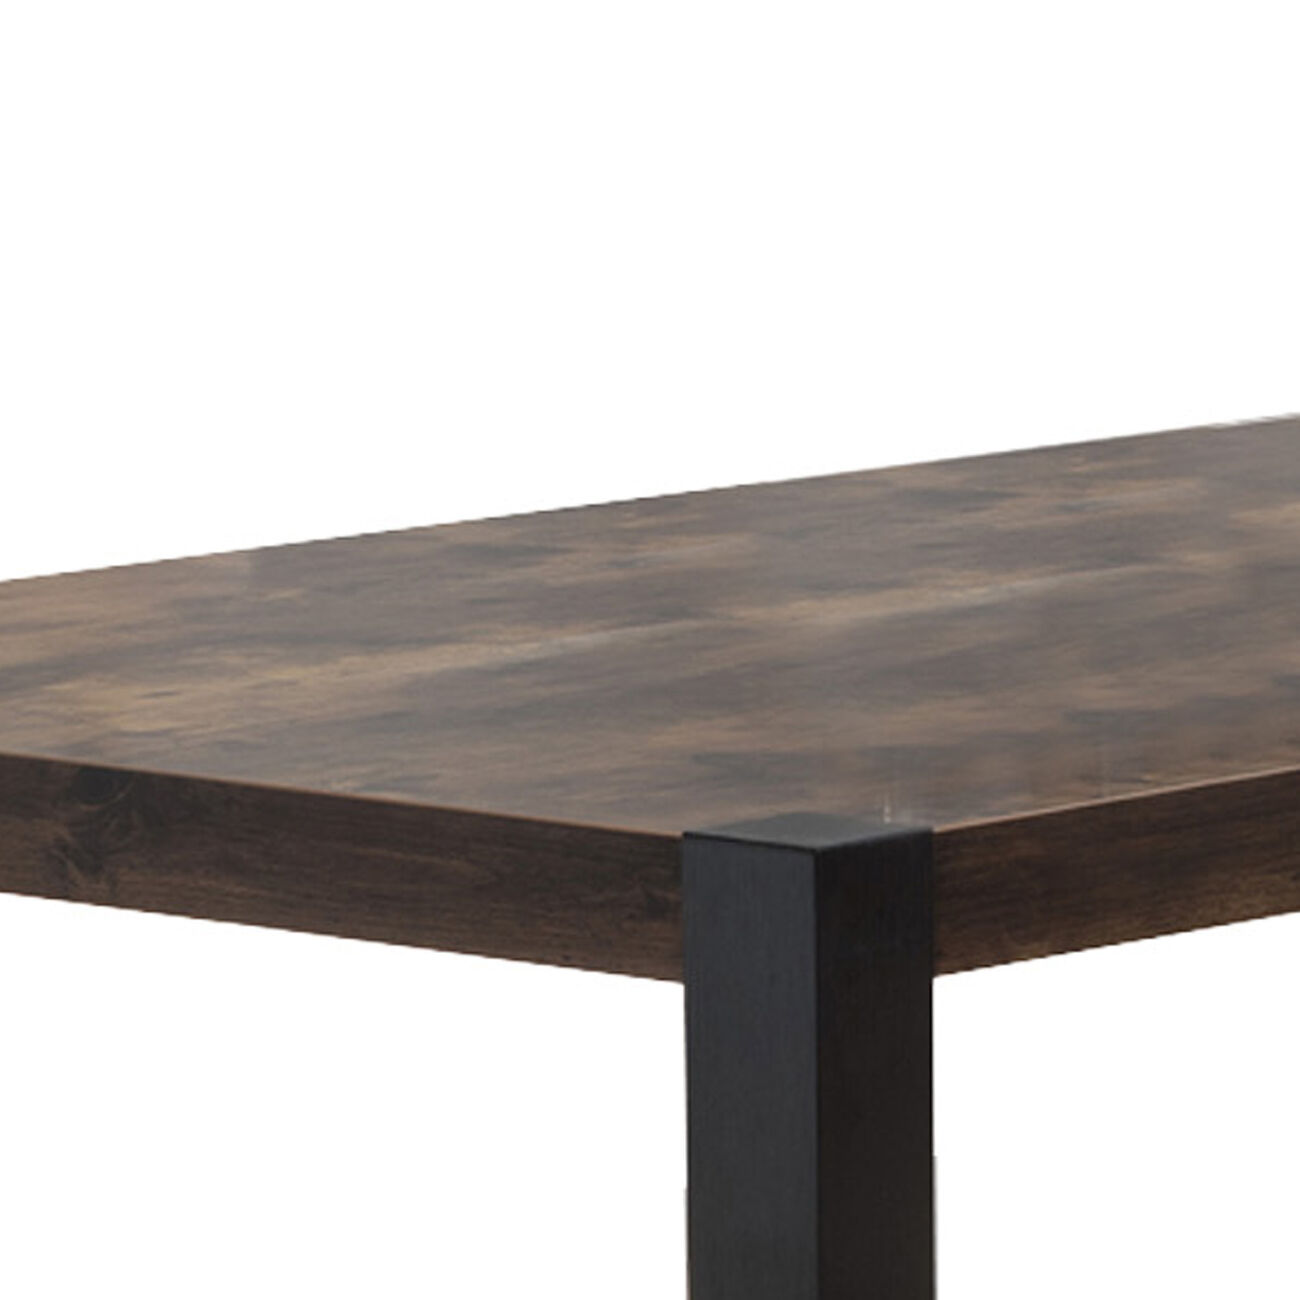 Wooden Dining Table with Straight Legs, Distressed Brown and Black